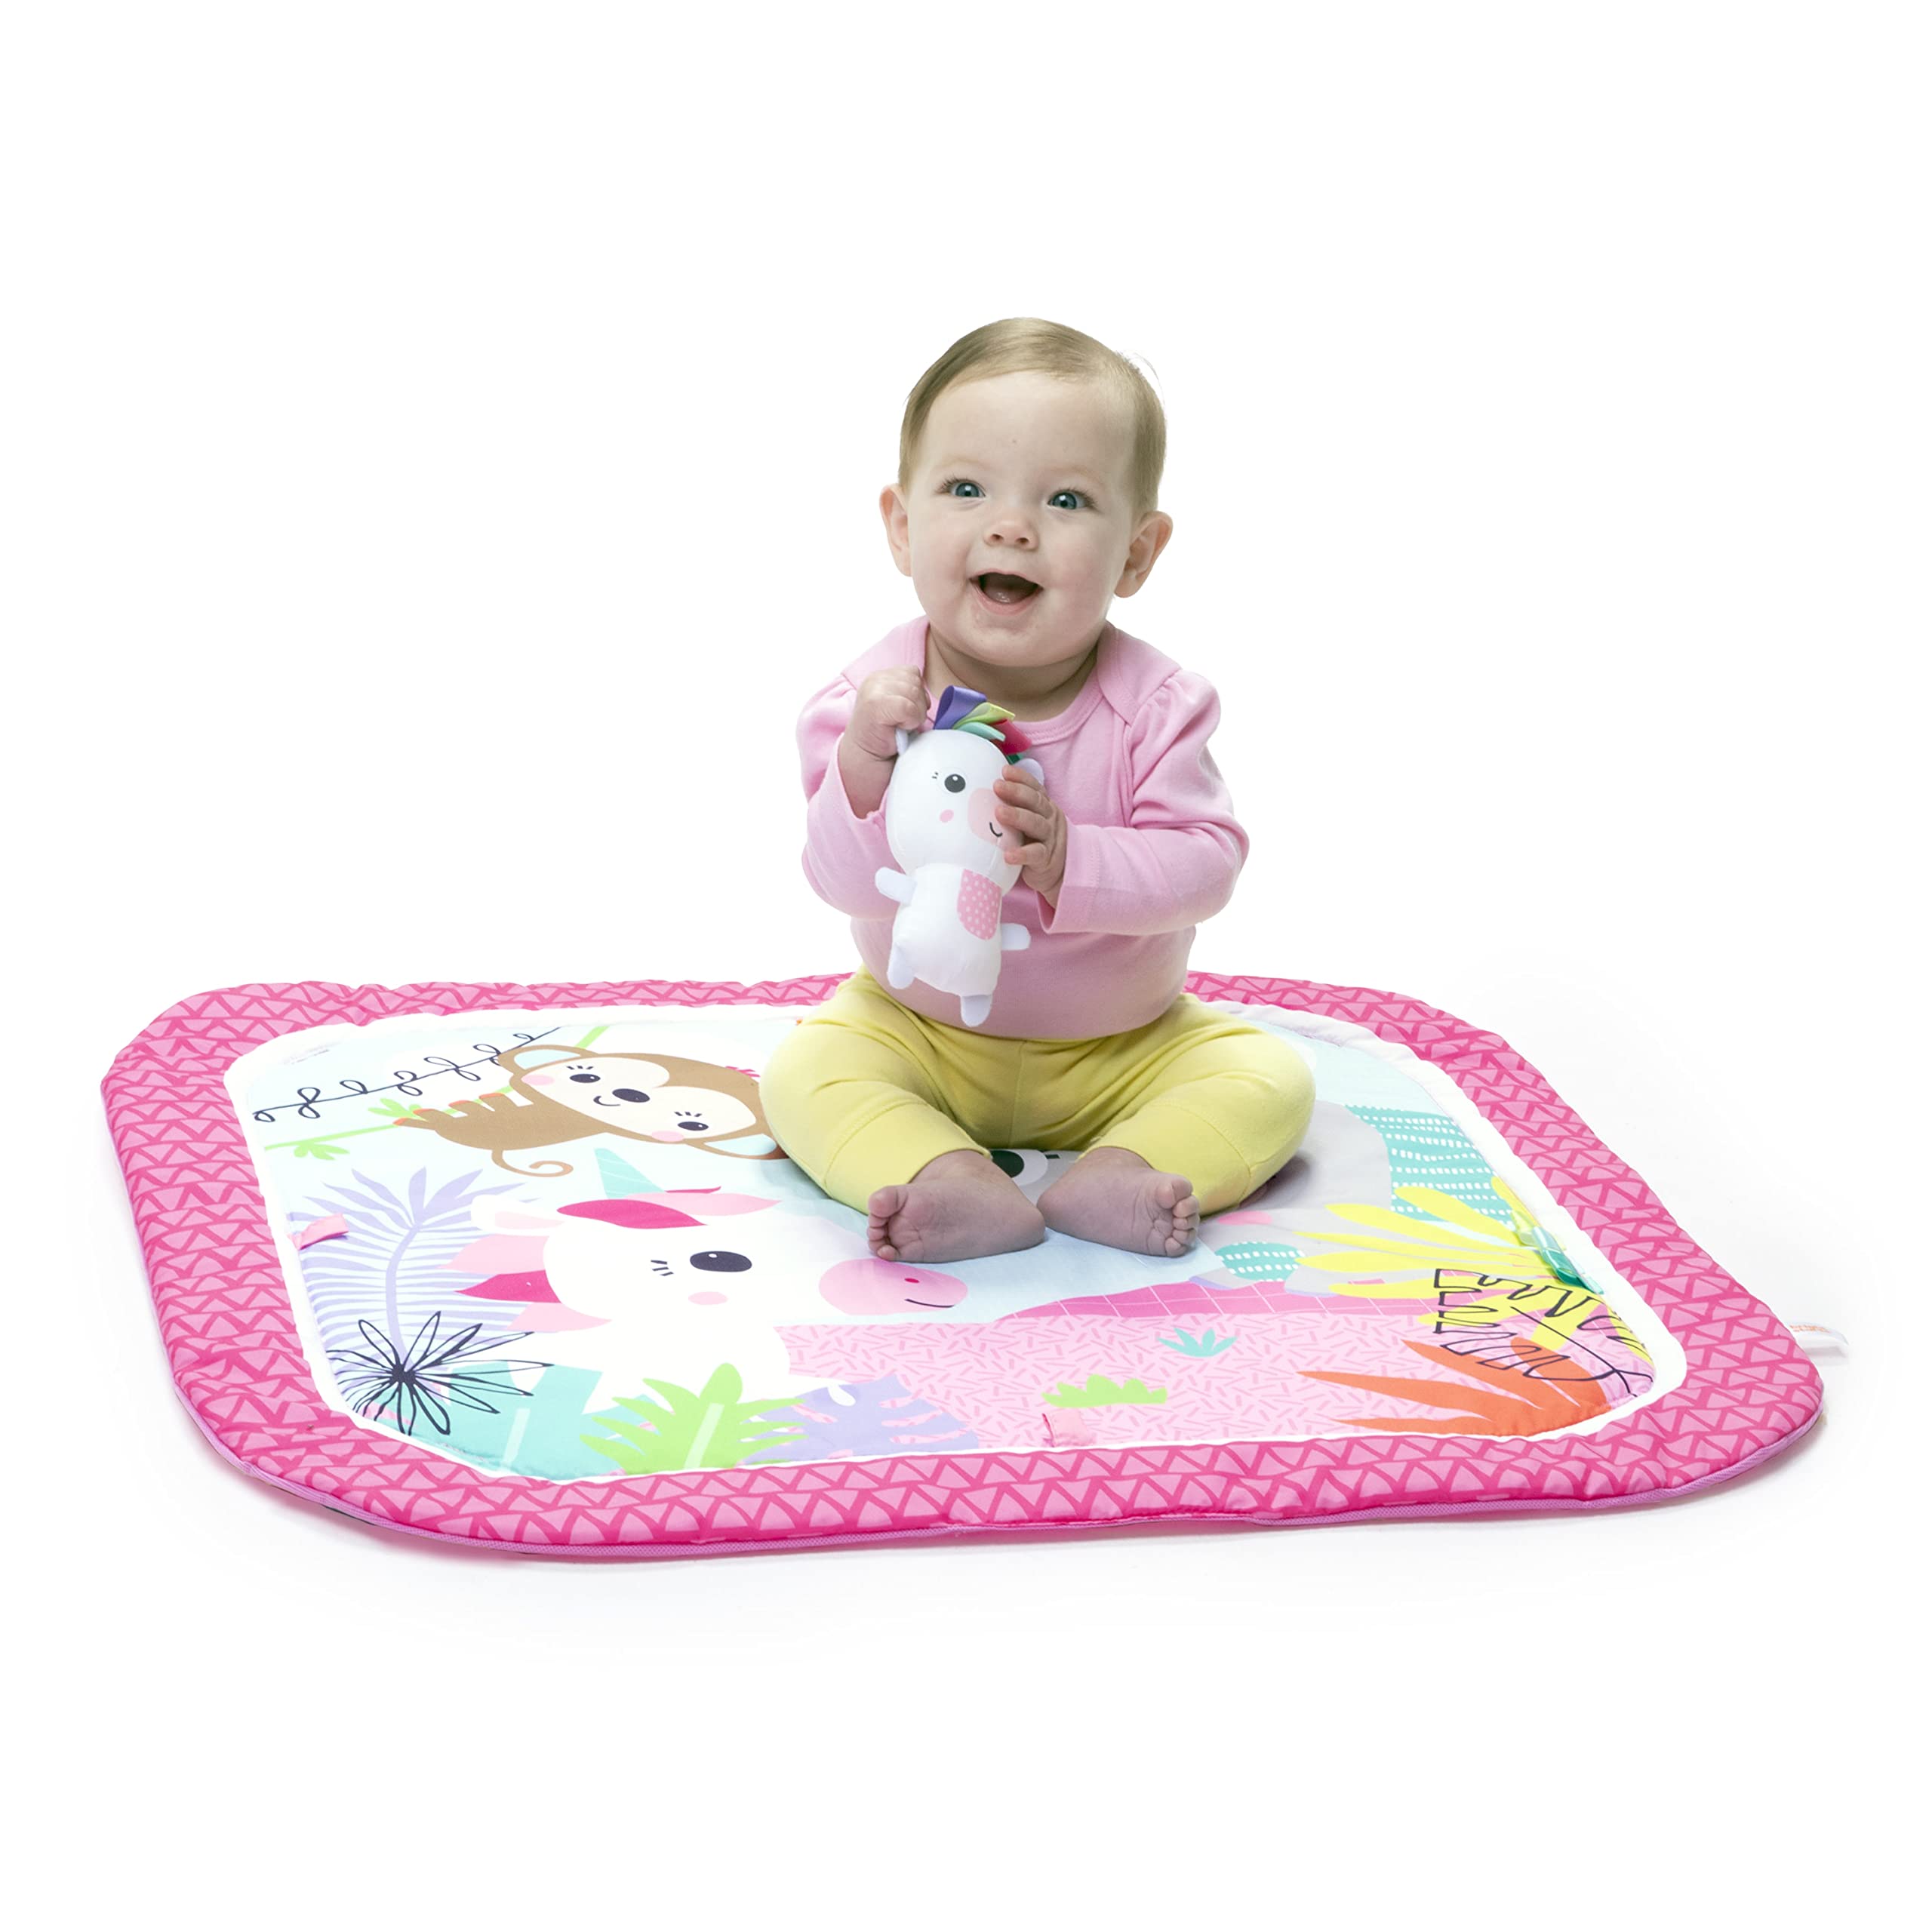 Bright Starts Unicorn Crew Baby Activity Gym & Play Mat with Taggies, Newborn and up - Pink, 30x30x18 Inch